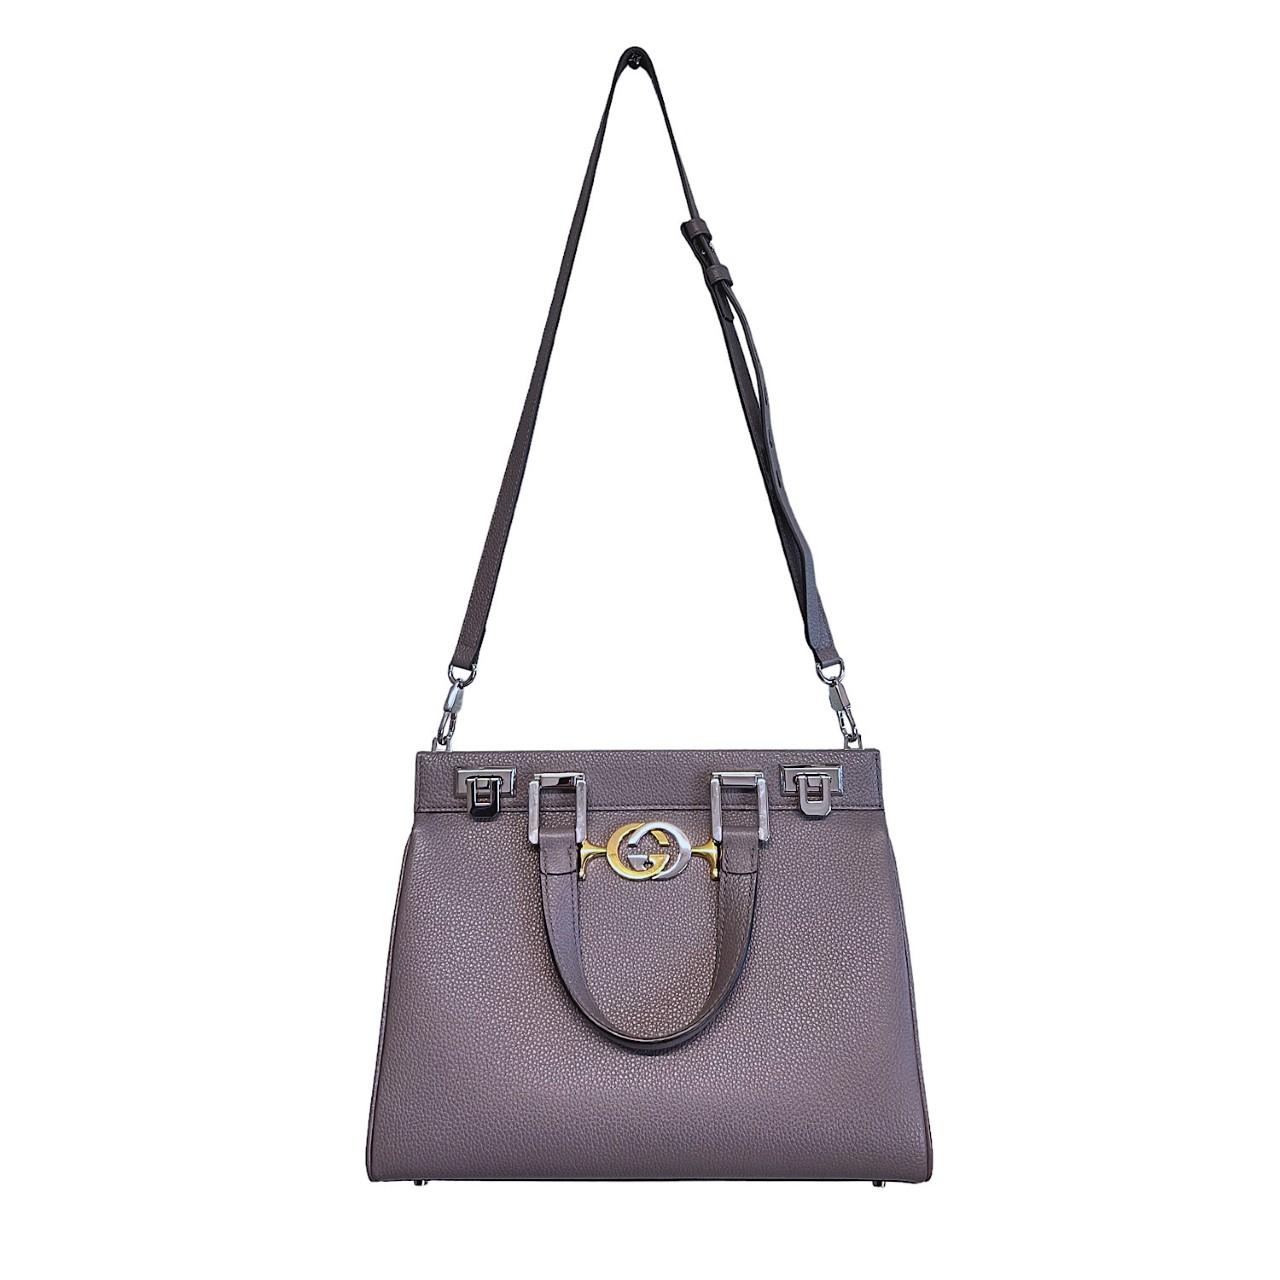 We are offering this Gucci top handle bag. Crafted in Italy, this designer bag was made with grey leather, gold-tone hardware, and silver-tone hardware. It features a silver and gold-tone Gucci GG logo and dual leather top handles. It has a